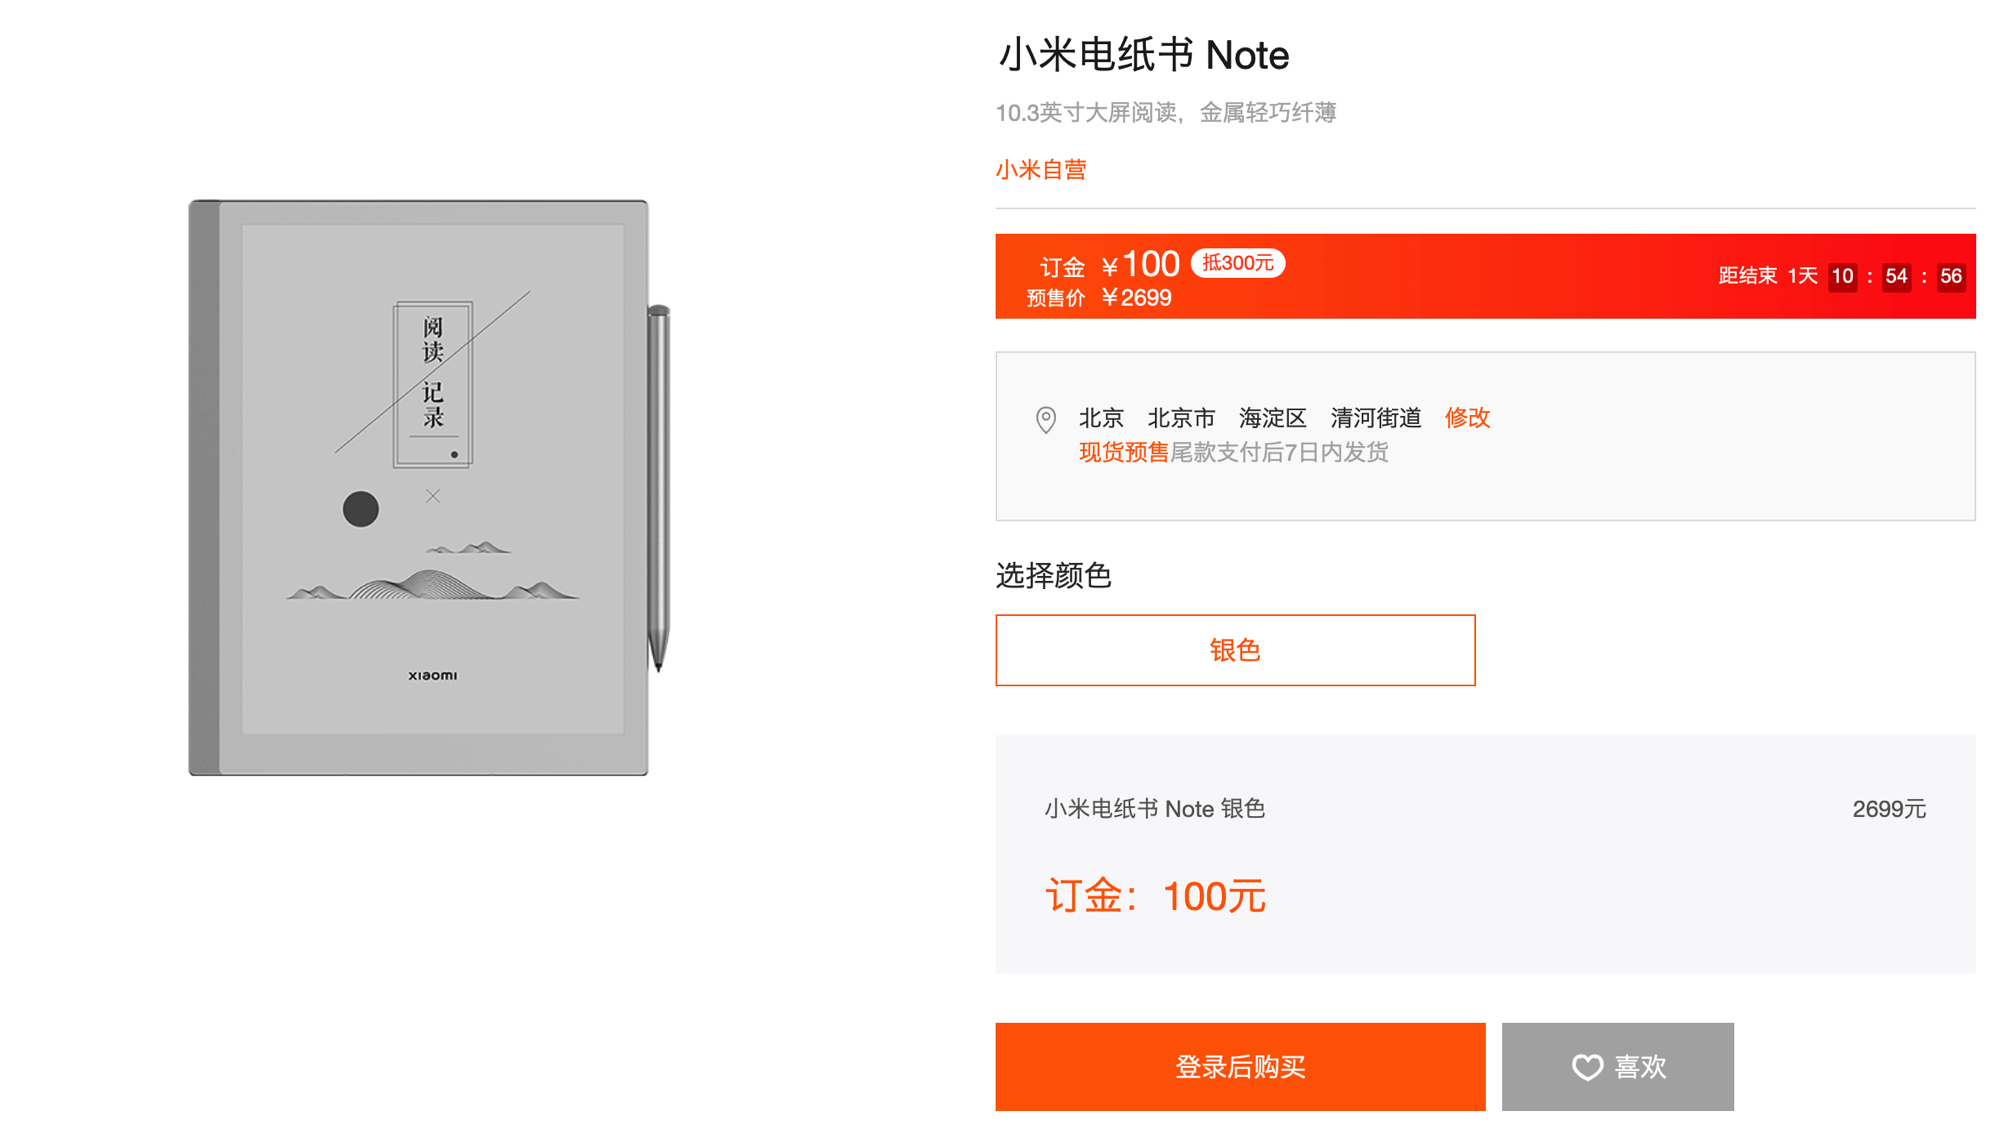 Xiaomi Note E-Ink Tabletの発売日と価格